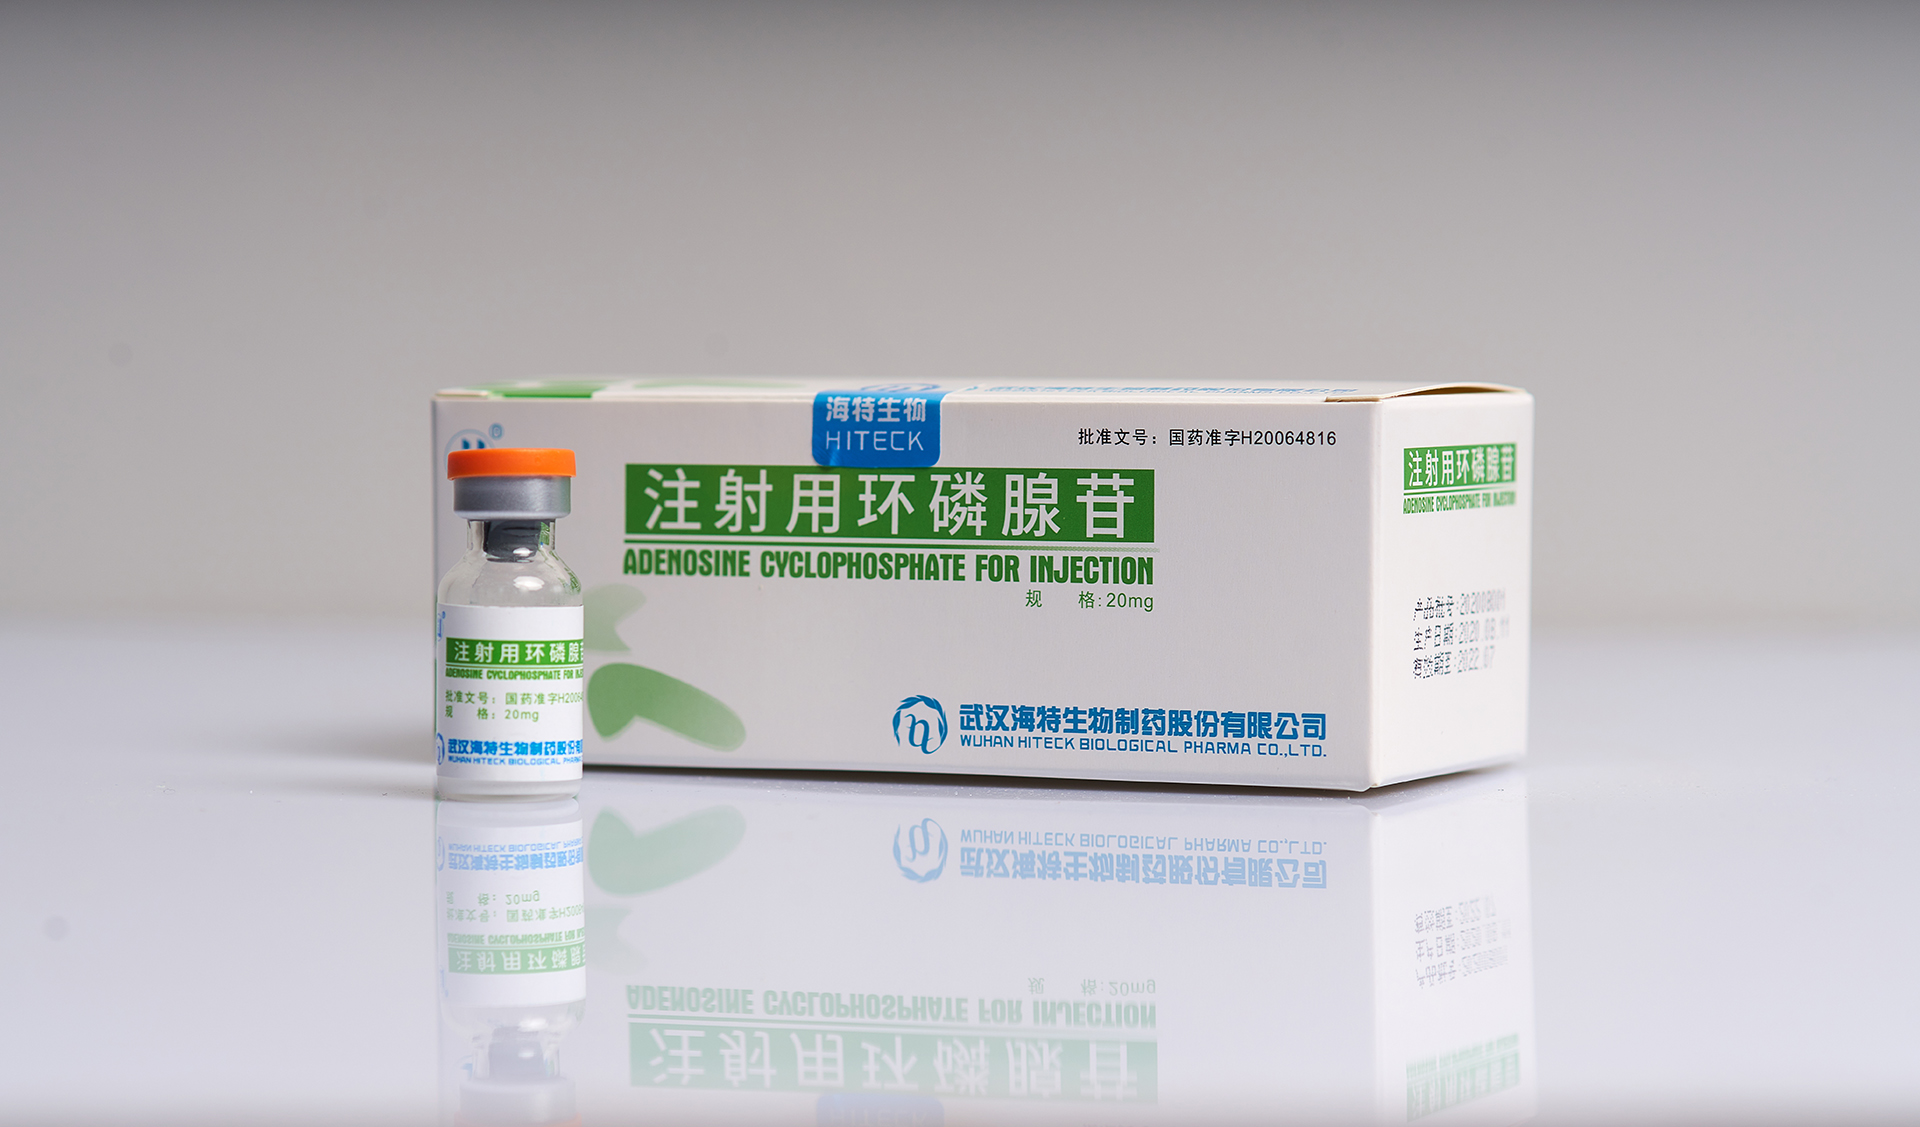 Adenosine Cyclophosphate for Injection